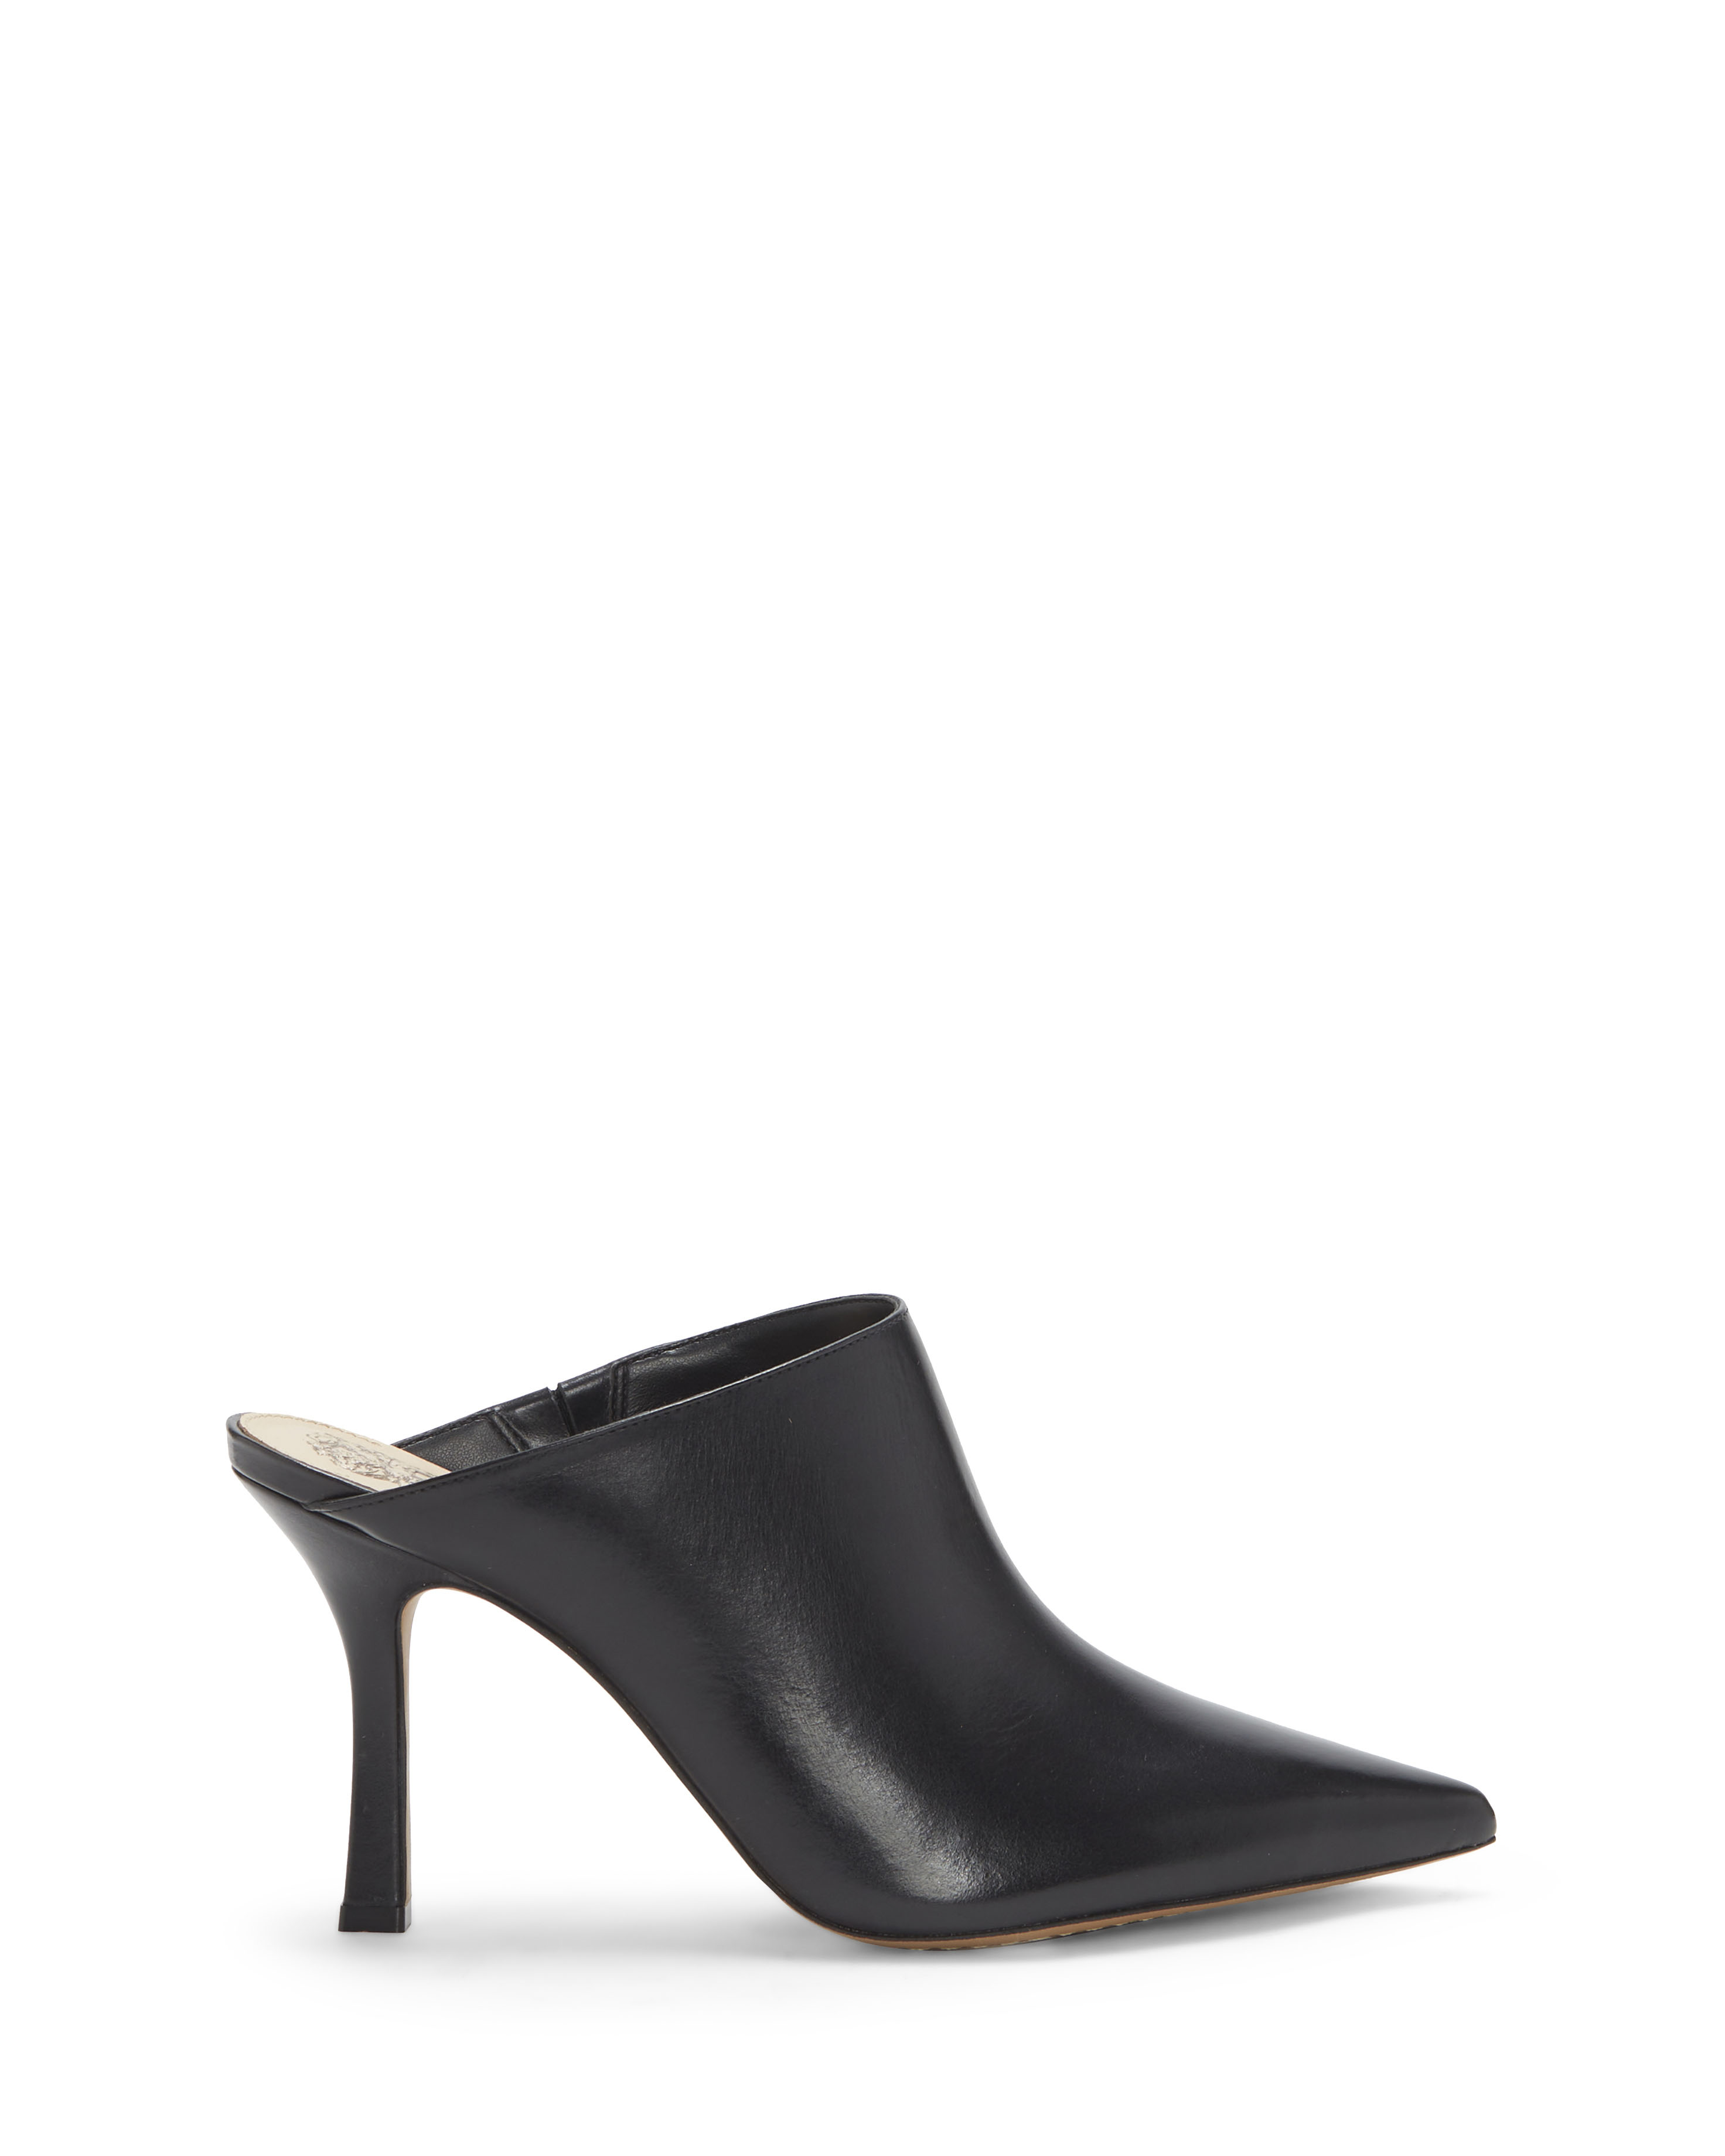 Vince Camuto Aminnie Point-Toe Mule | Vince Camuto